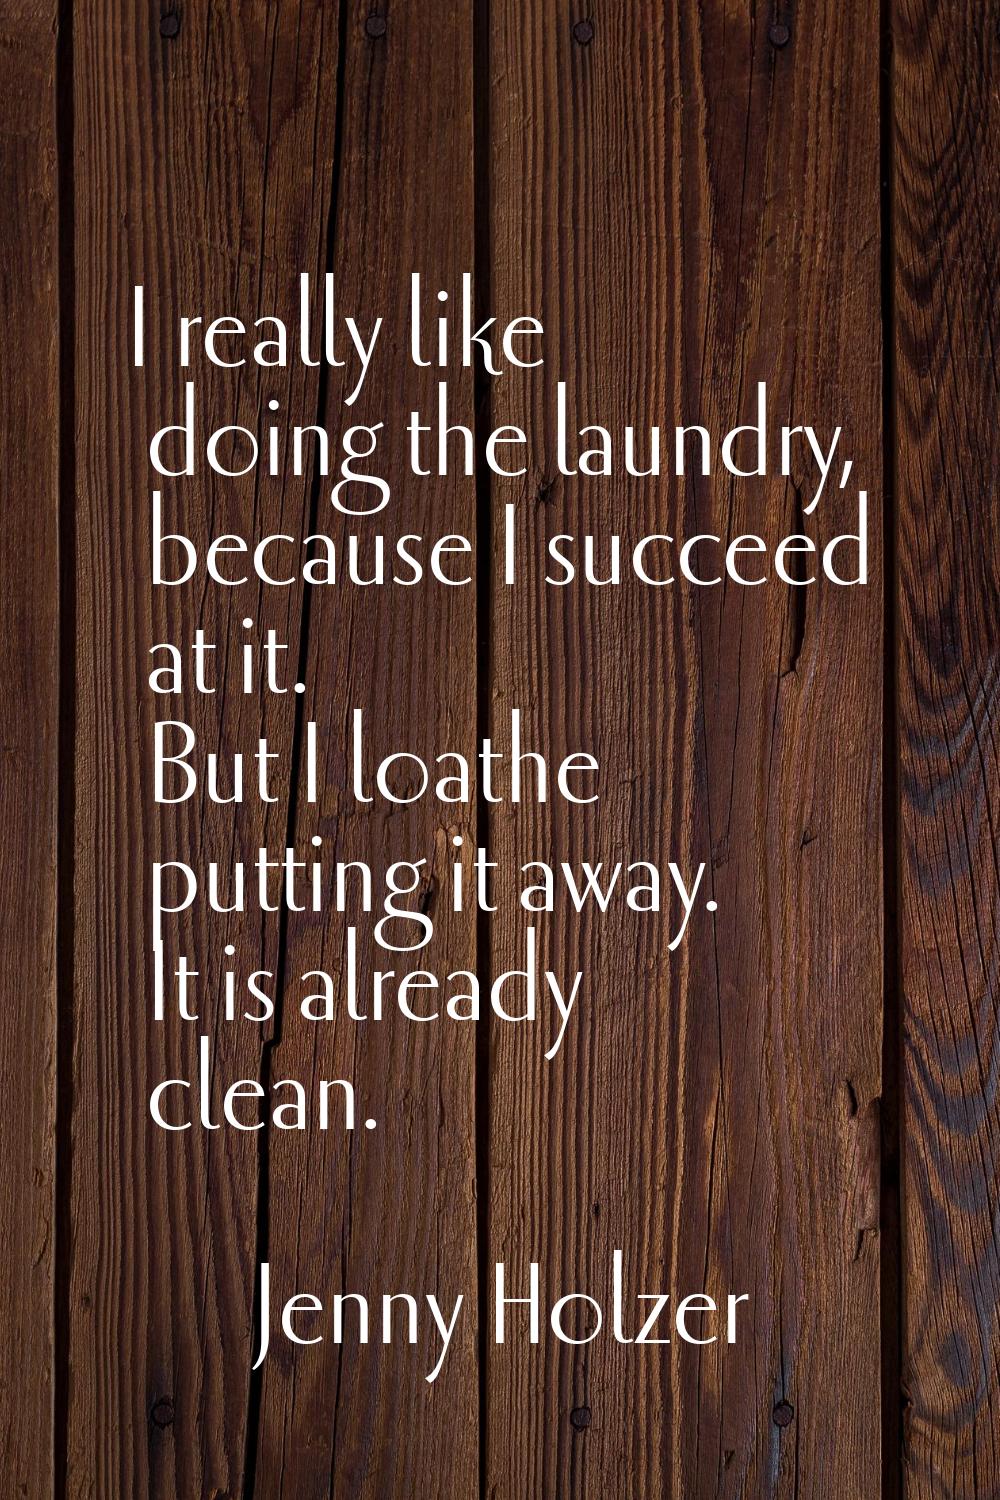 I really like doing the laundry, because I succeed at it. But I loathe putting it away. It is alrea